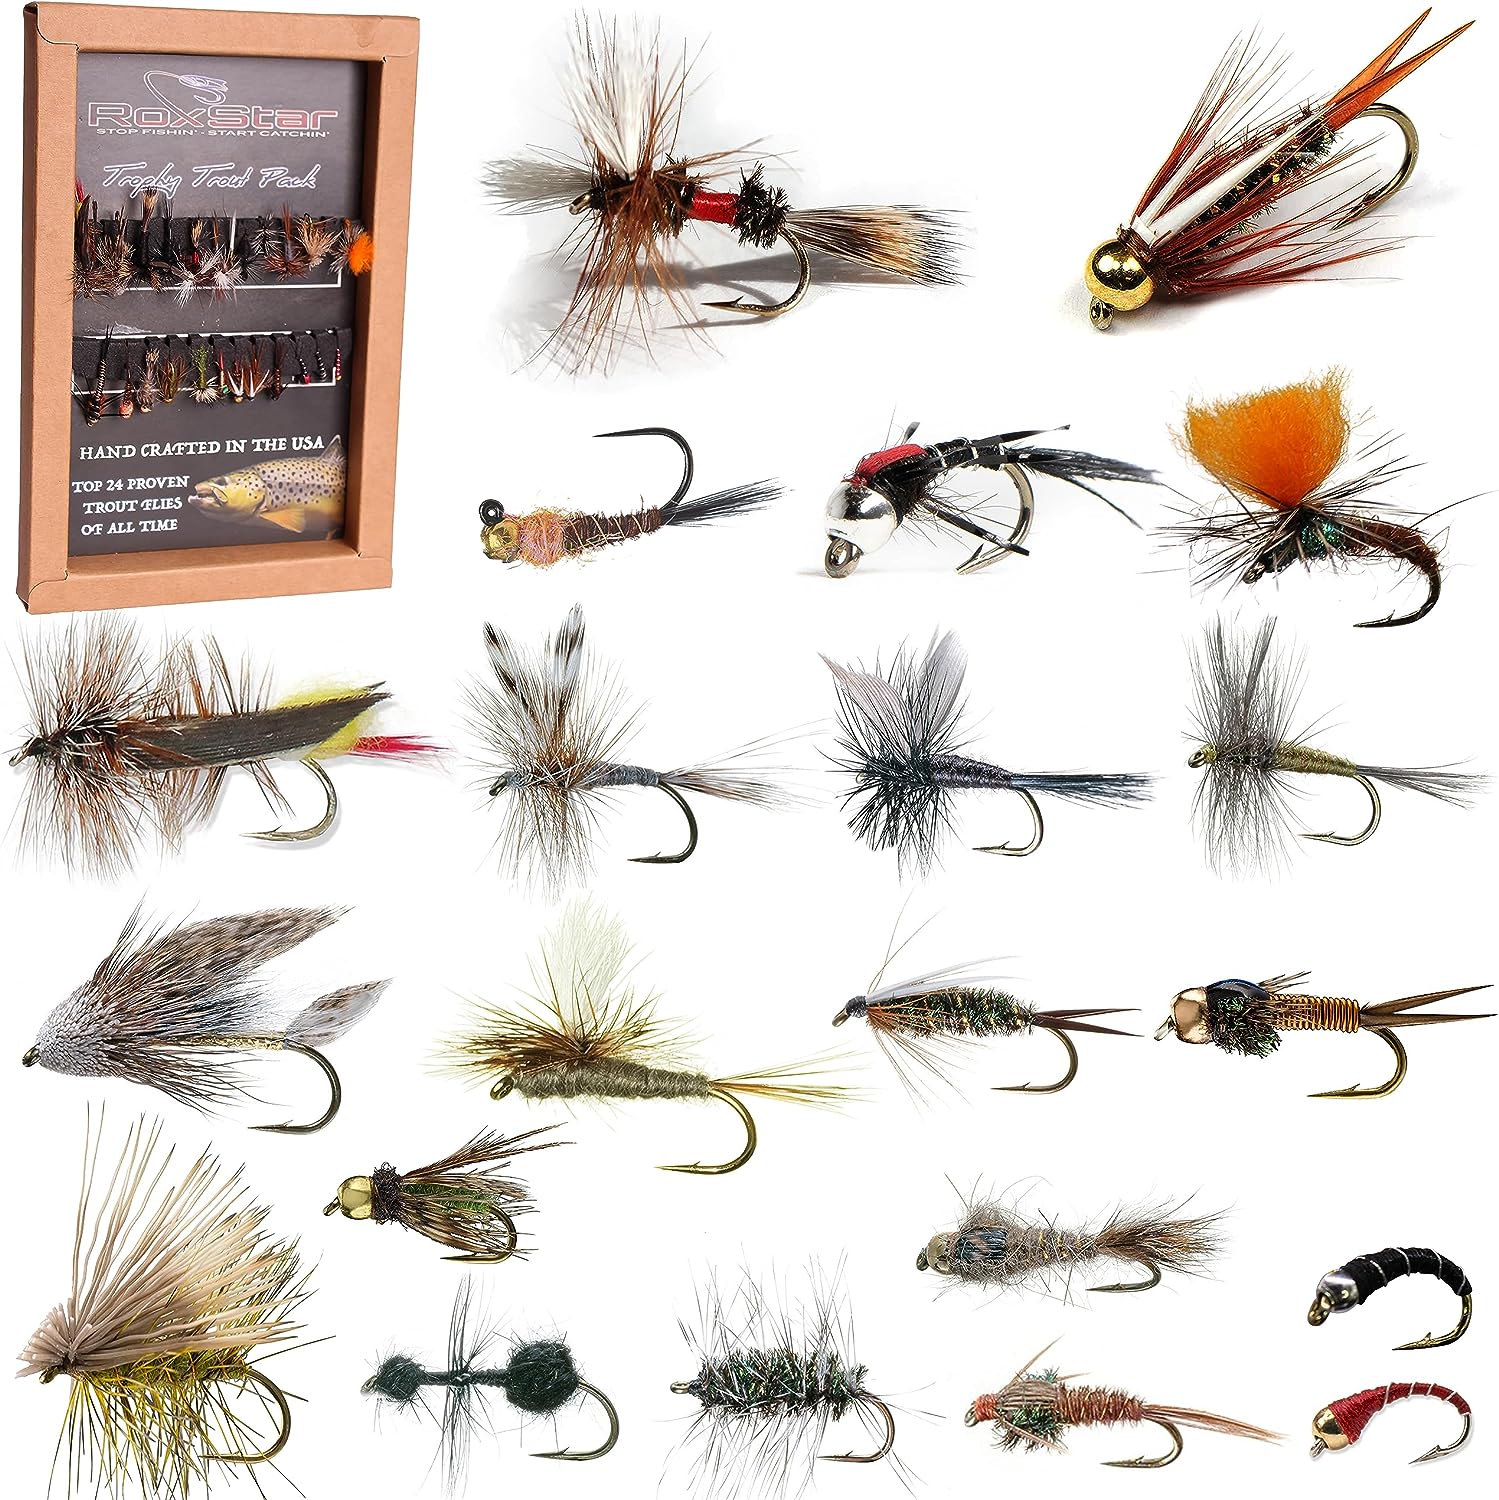 Top Selling Flies - Guide's Master Assortment - Nymphs (60 Flies)